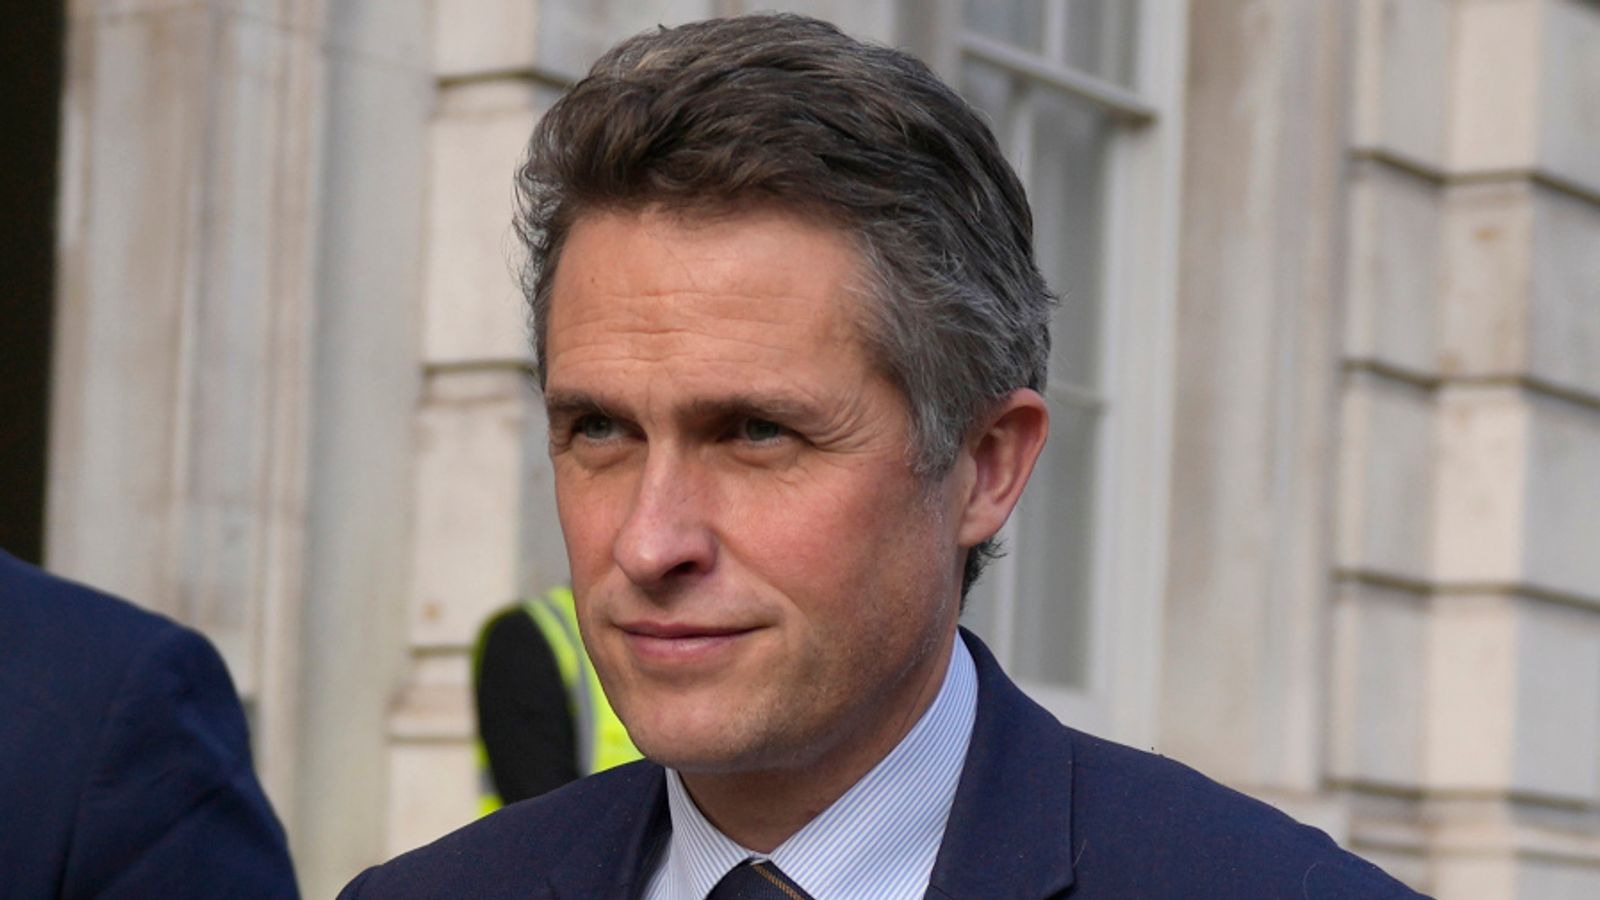 Gavin Williamson 'regrets language used' amid bullying complaint but PM 'wasn't aware' of specific claims